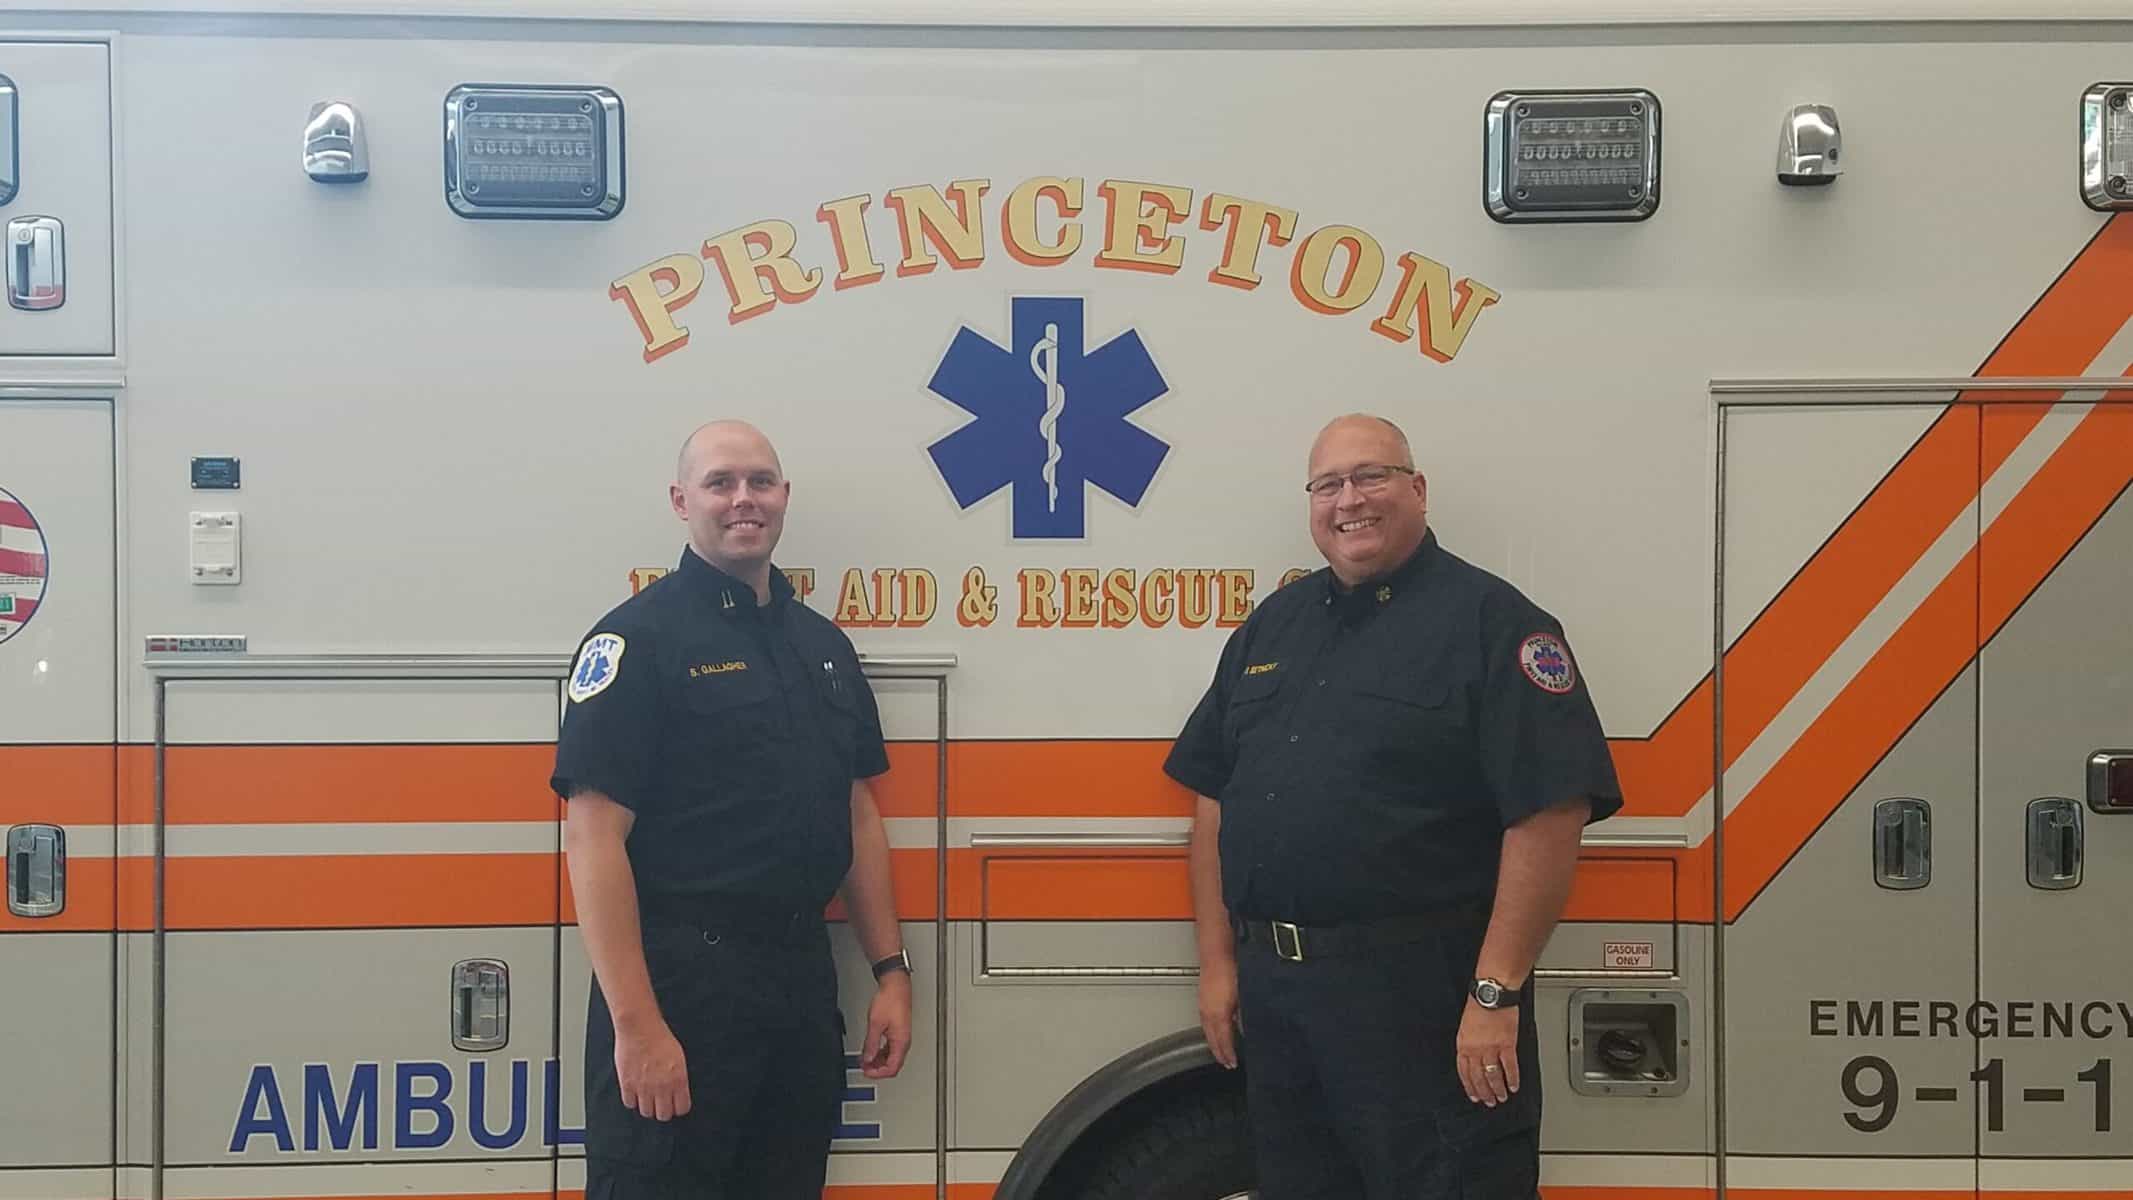 Princeton First Aid & Rescue Squad Chief Frank Setnicky to retire after 35 years of service